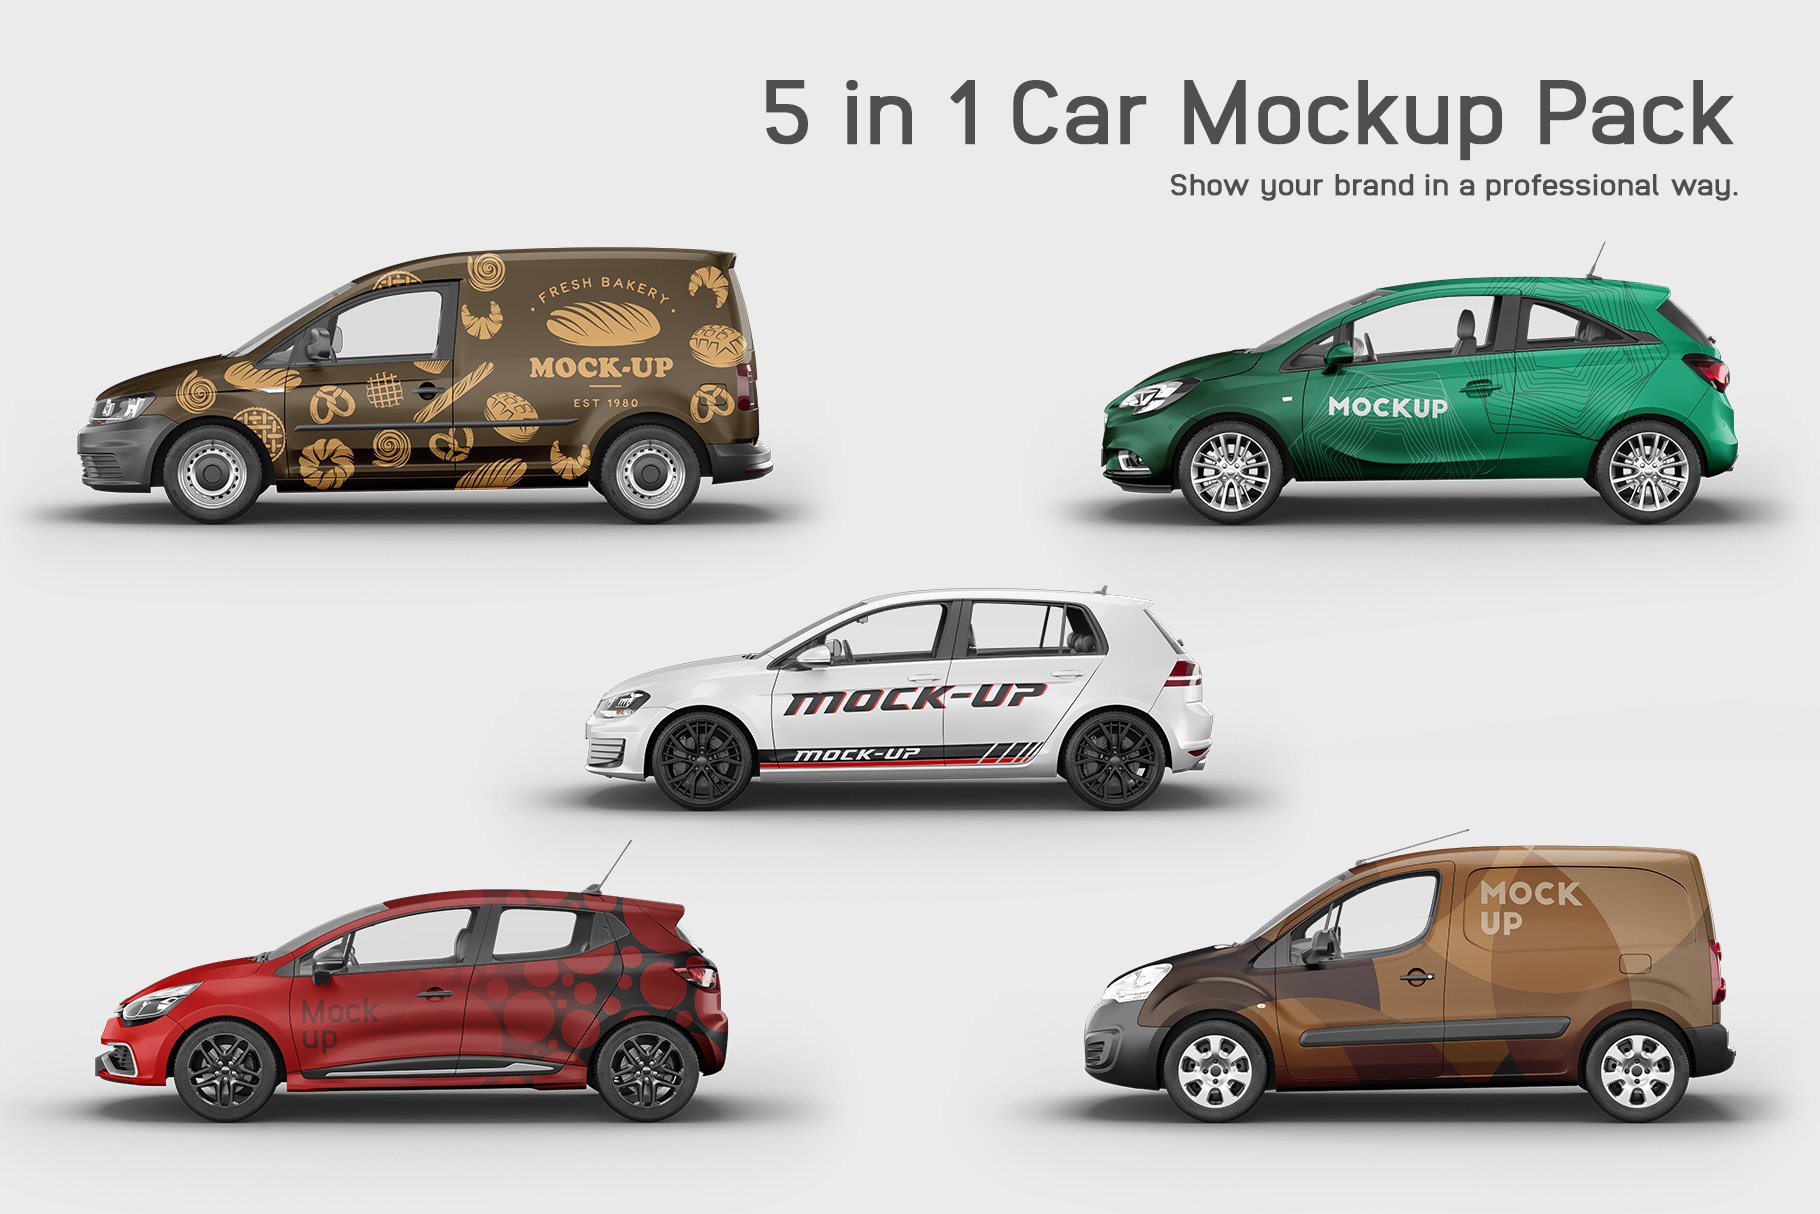 Car Mockup Pack 5 in 1 cover image.